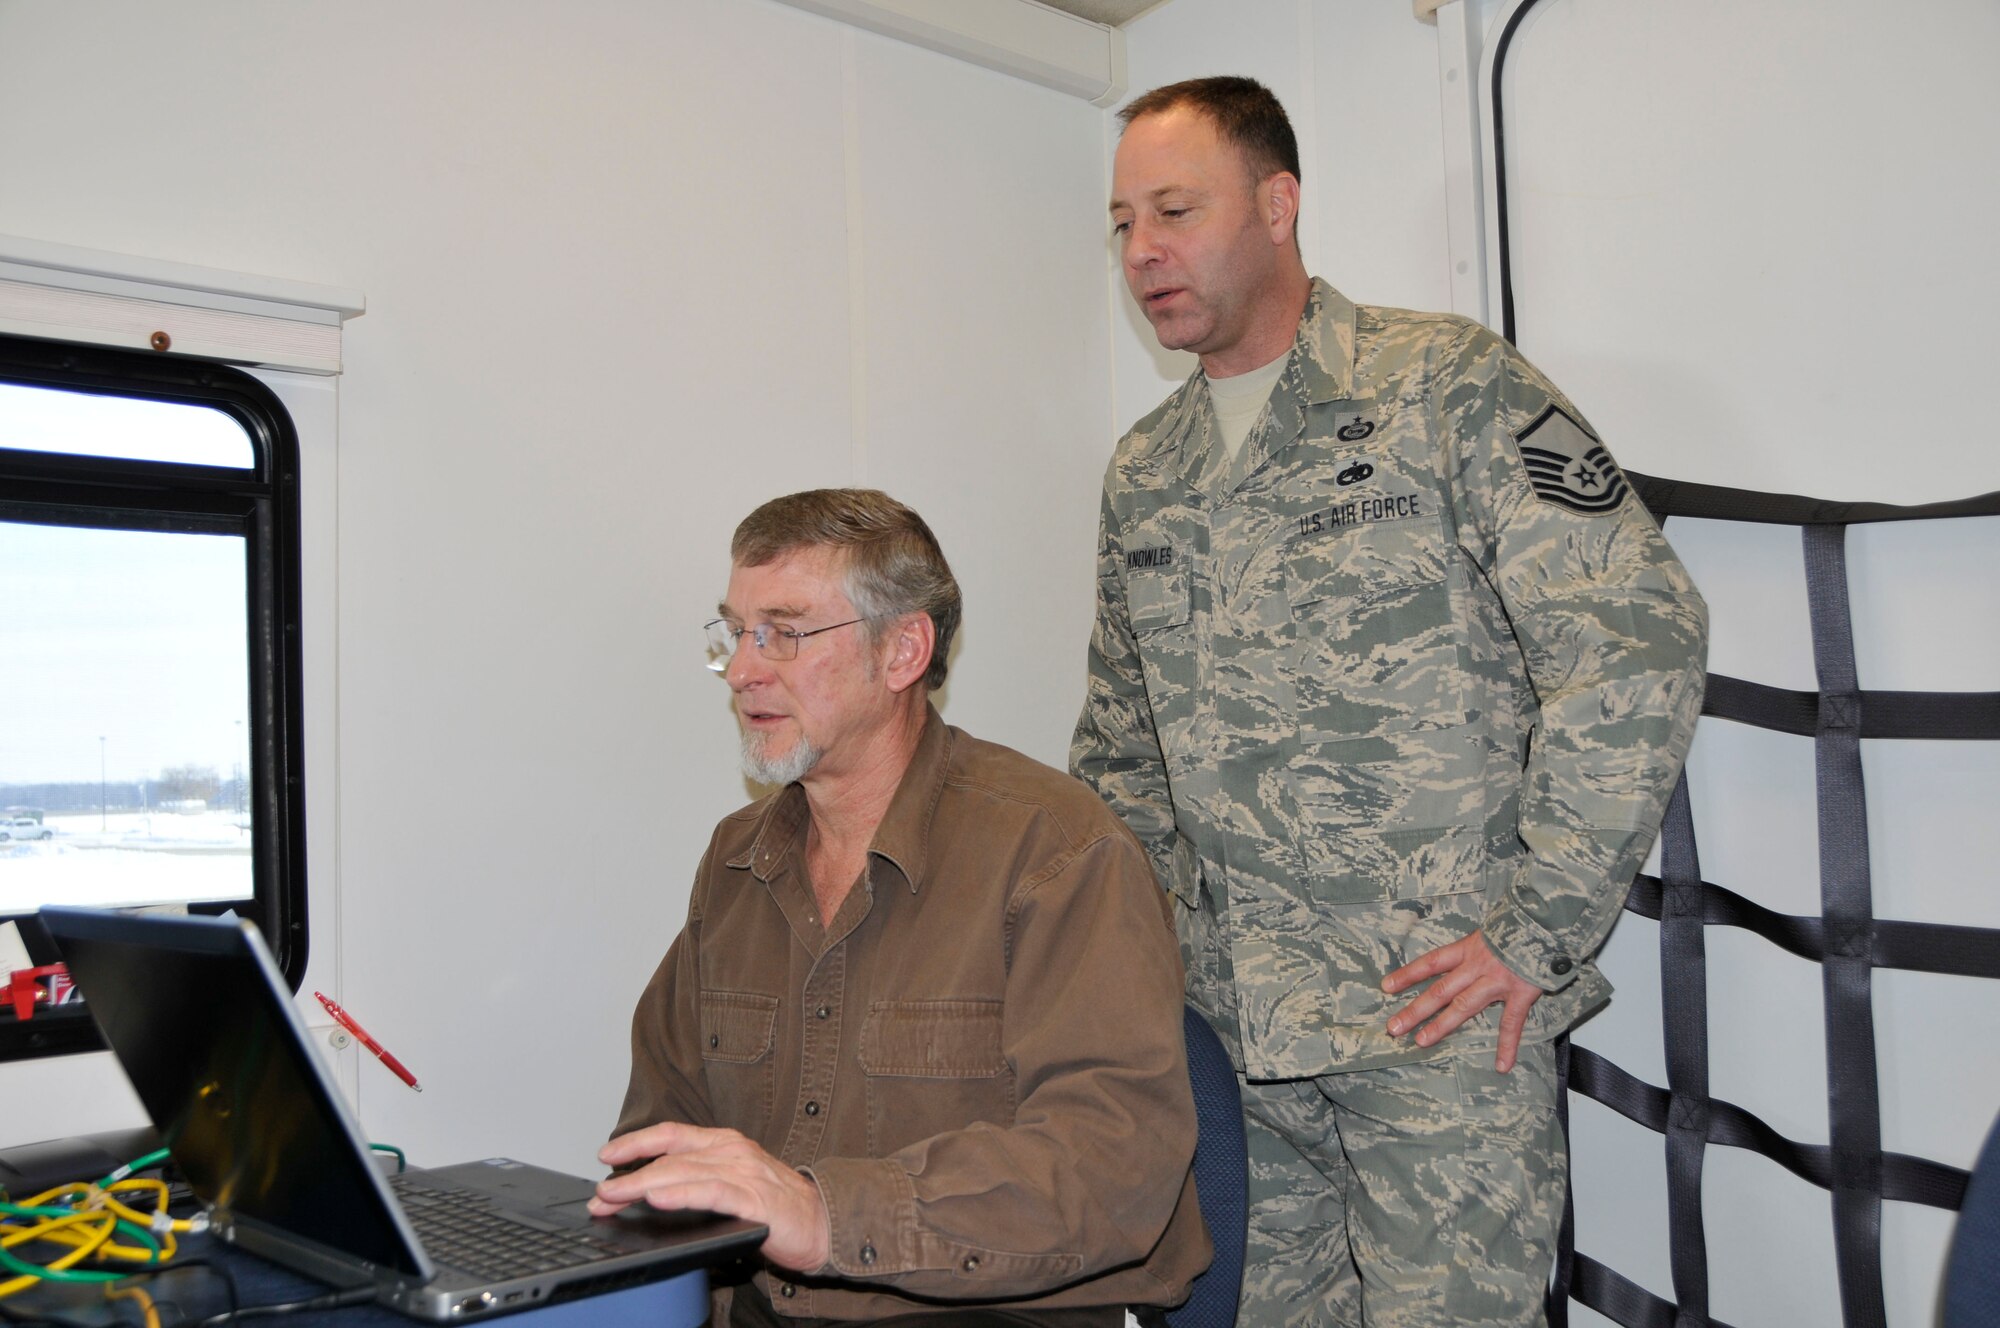 U.S. Air Force Master Sgt. Ben Knowles, 181st Intelligence Wing, Indiana Air National Guard and Mr. Doug Reinbold, Readjustment Counseling Technician, Veterans Center look at imagery sent down into the Mobile Vet Center, Feb 6, 2014 Hulman Field, Terre Haute, Ind. In a natural disaster these images would be given to the incident commander to better prepare for recovery efforts. (U.S. Air National Guard photo by Senior Master Sgt. John S. Chapman/Released)